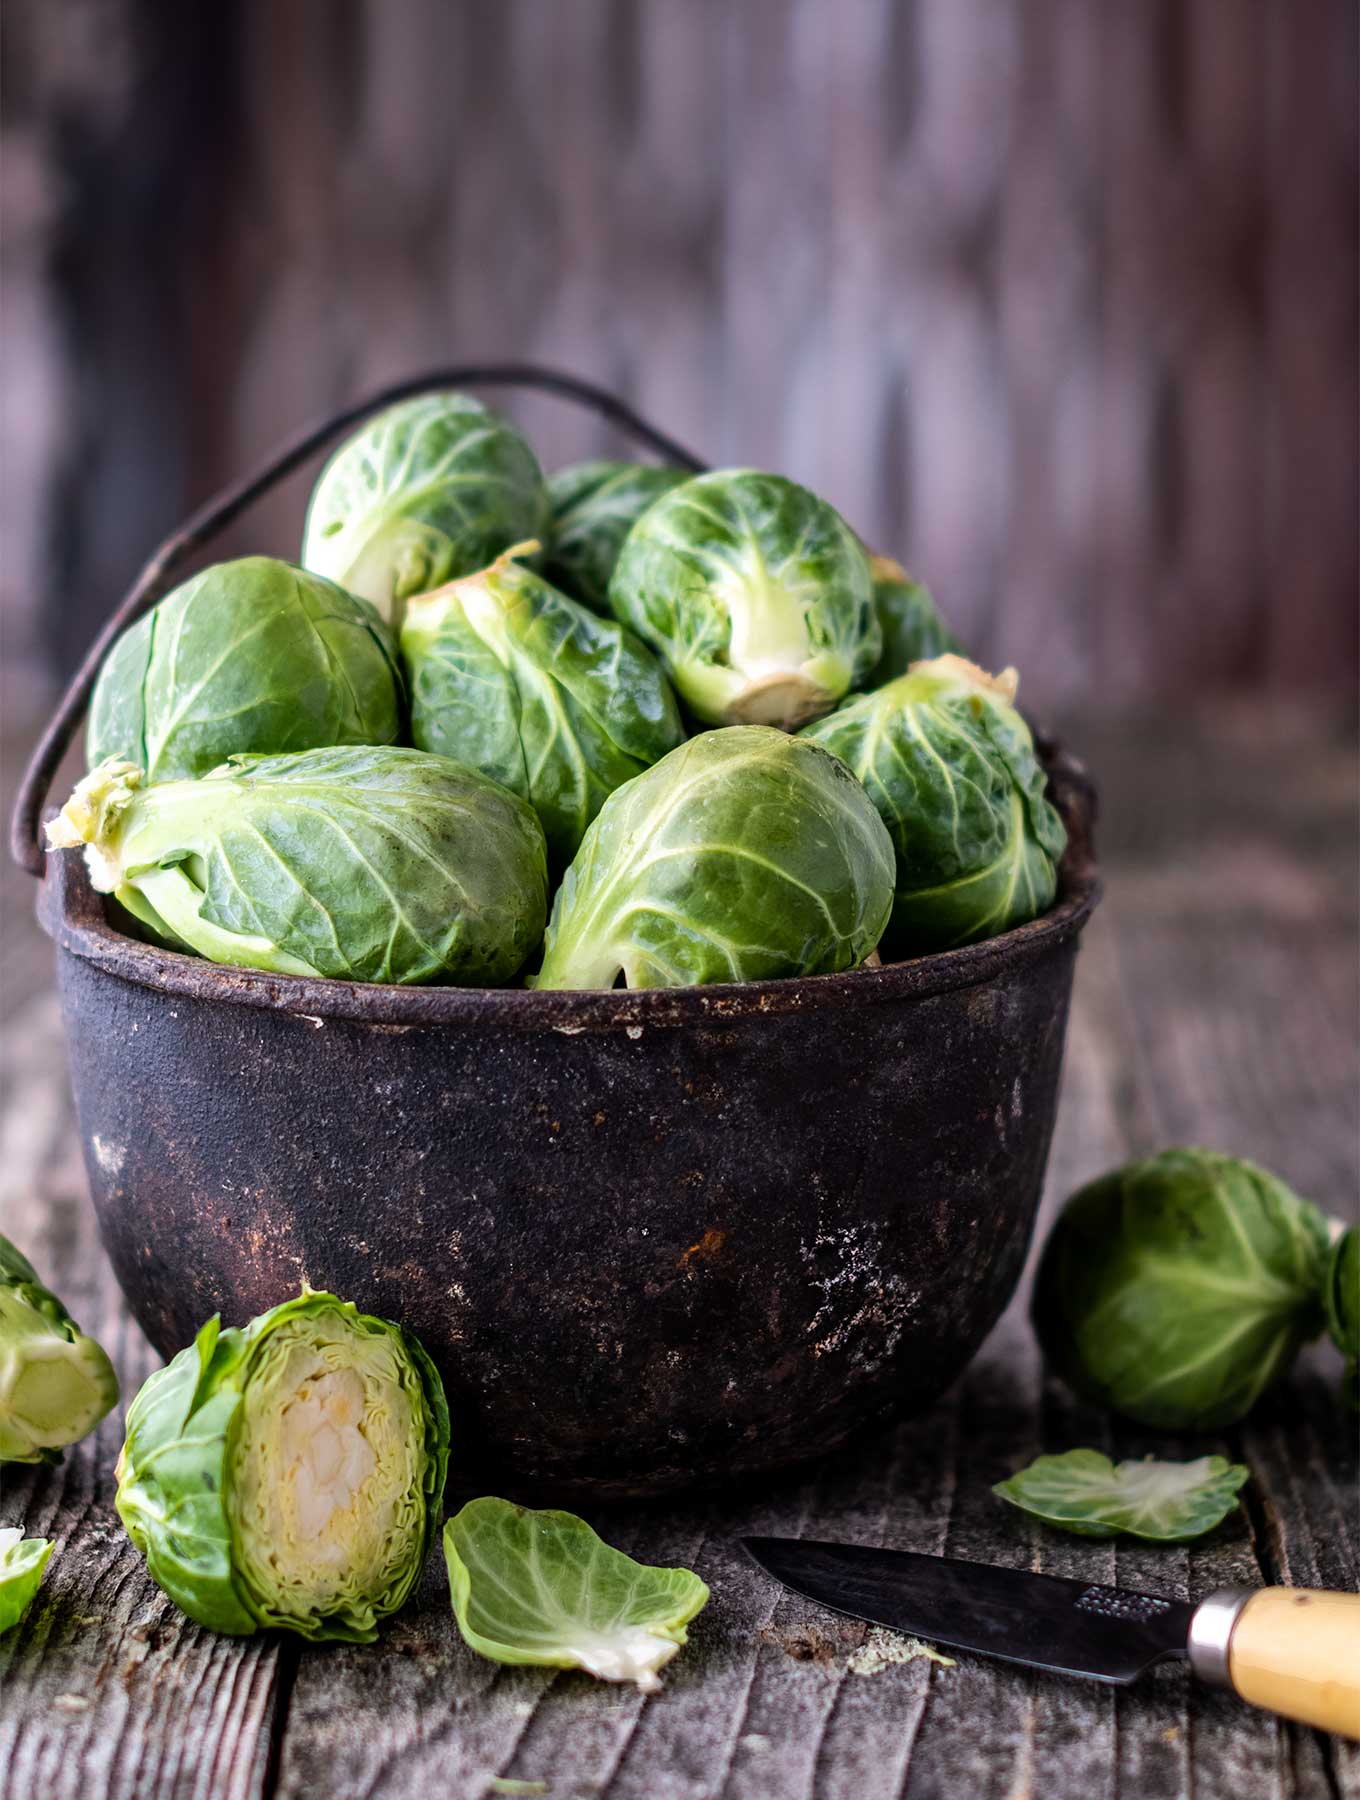 Metal bowl of brussels sprouts